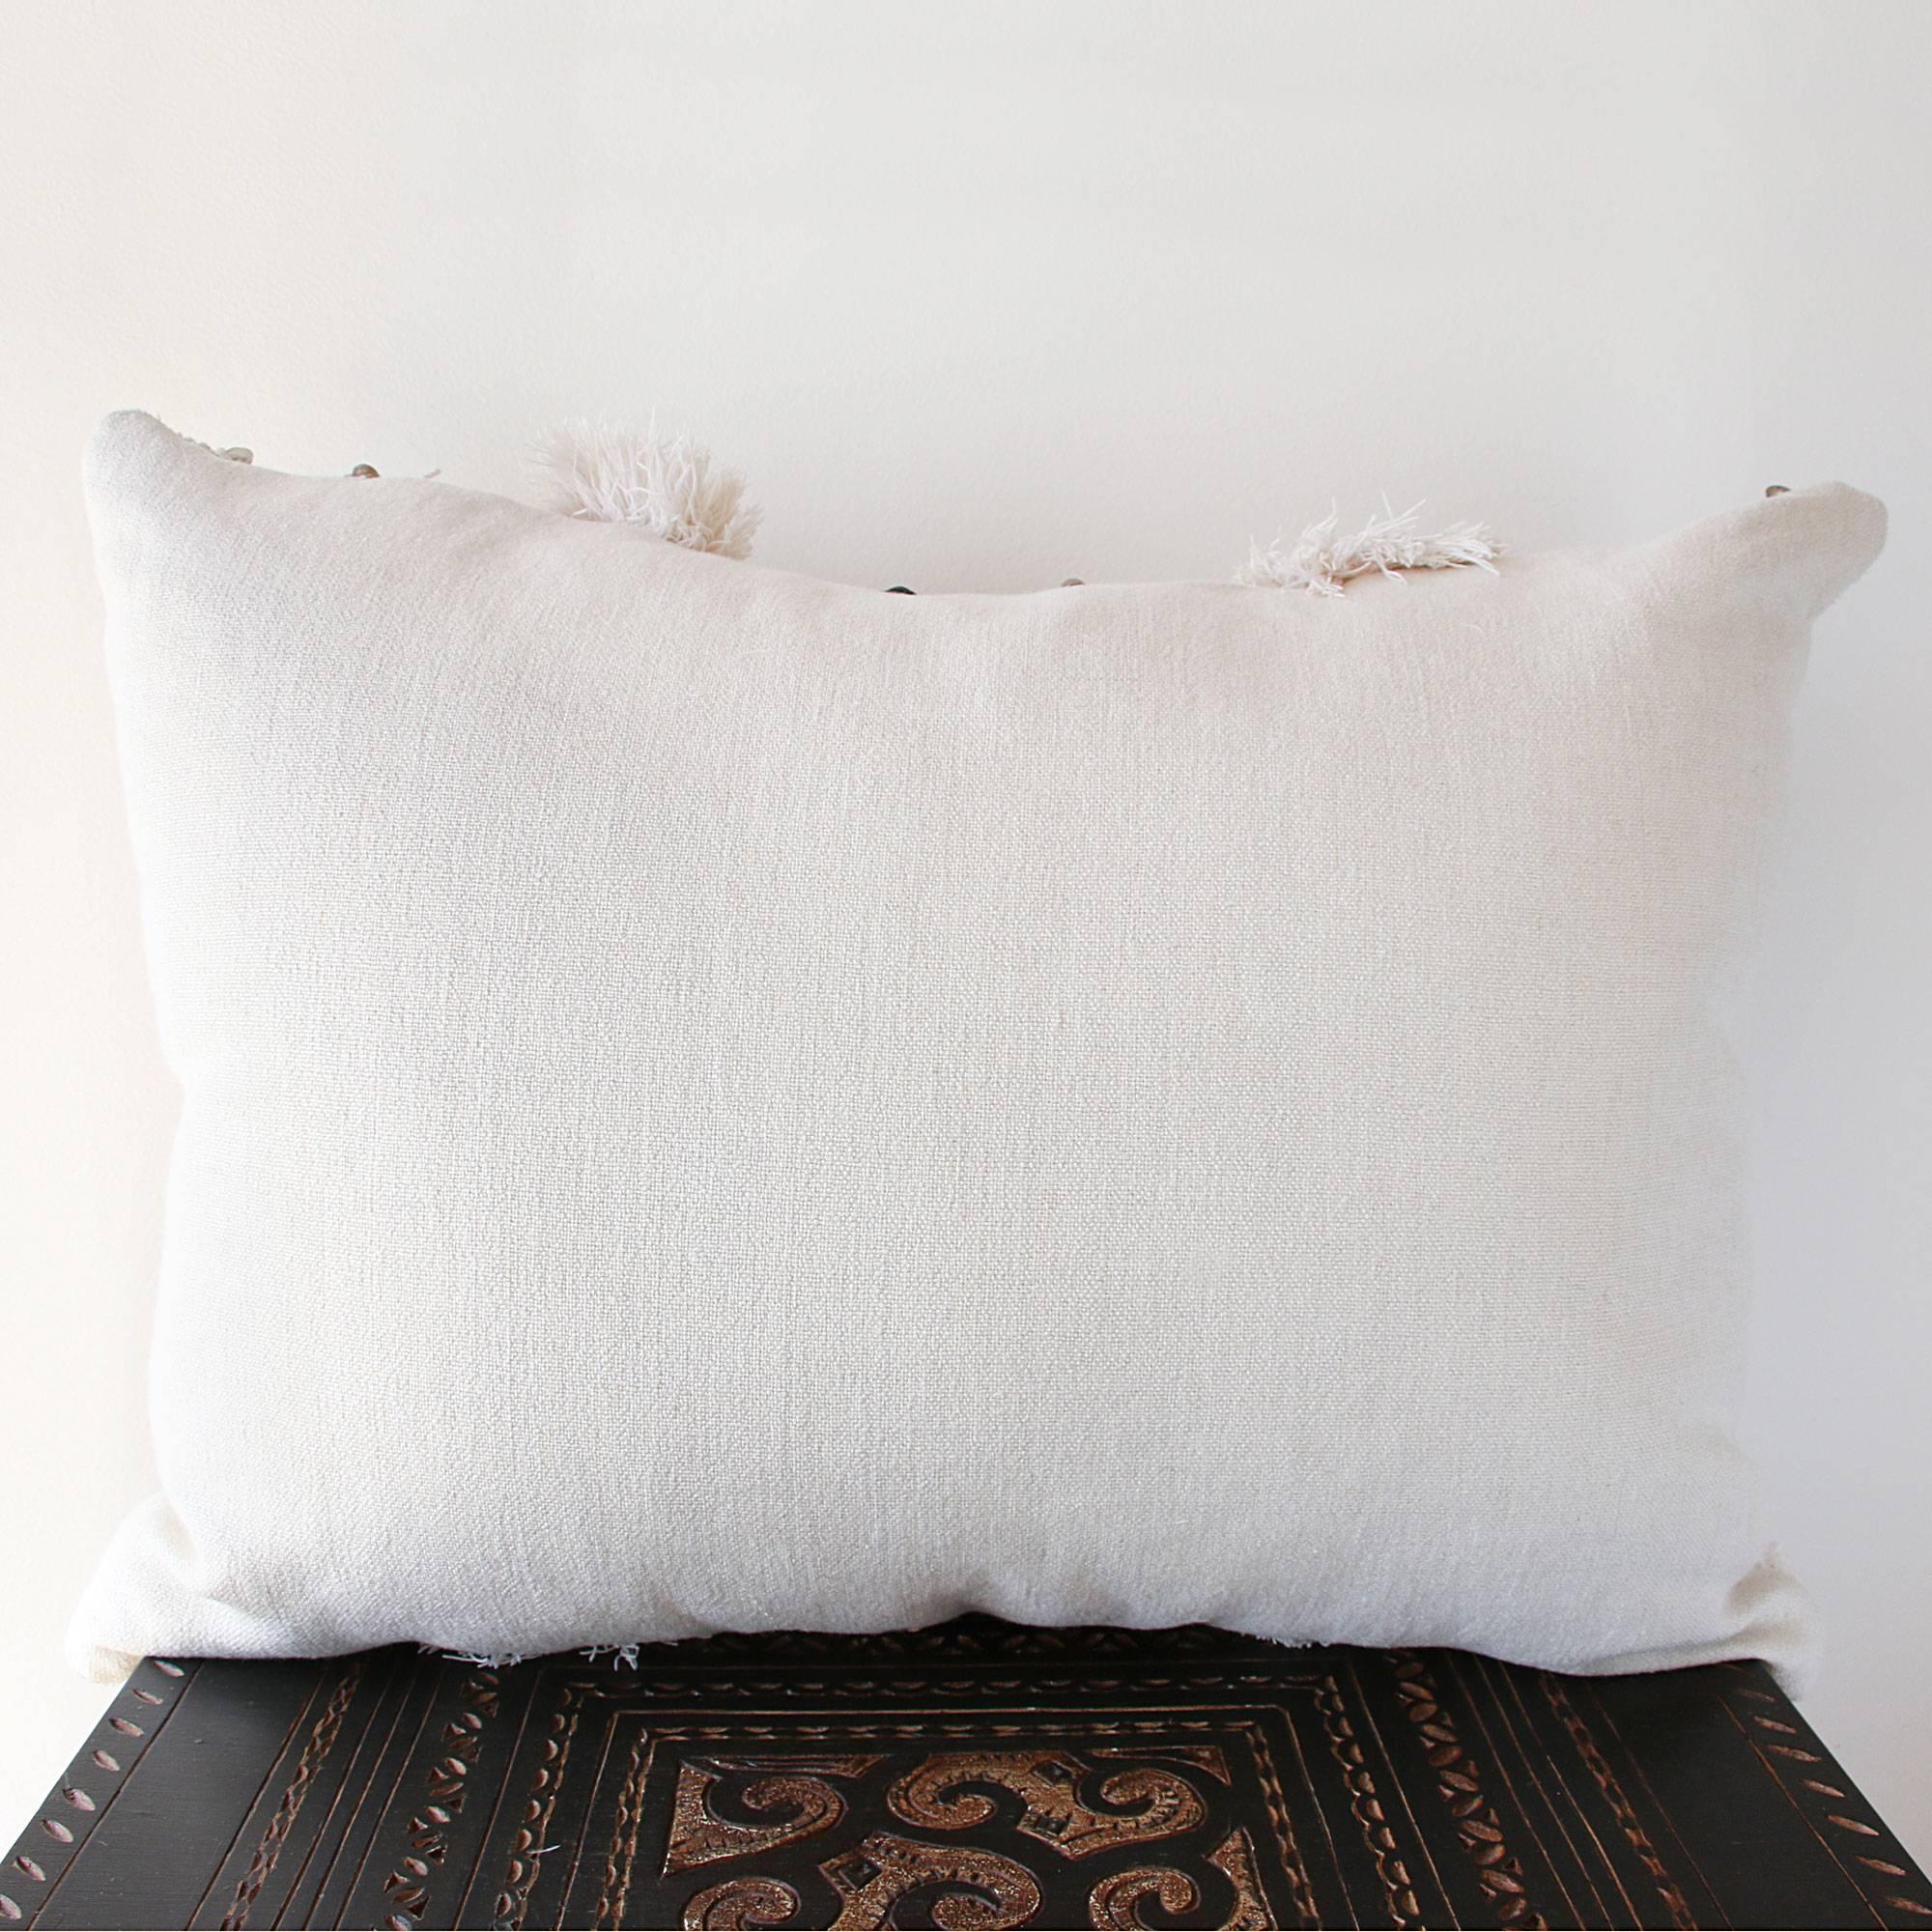 Handira is the Moroccan name for what is commonly referred to as a Wedding Blanket and is a traditional and symbolic textile. We have sourced pristine blankets in Morocco and repurposed them into sumptuous luxe pillows. Backed with soft Belgian